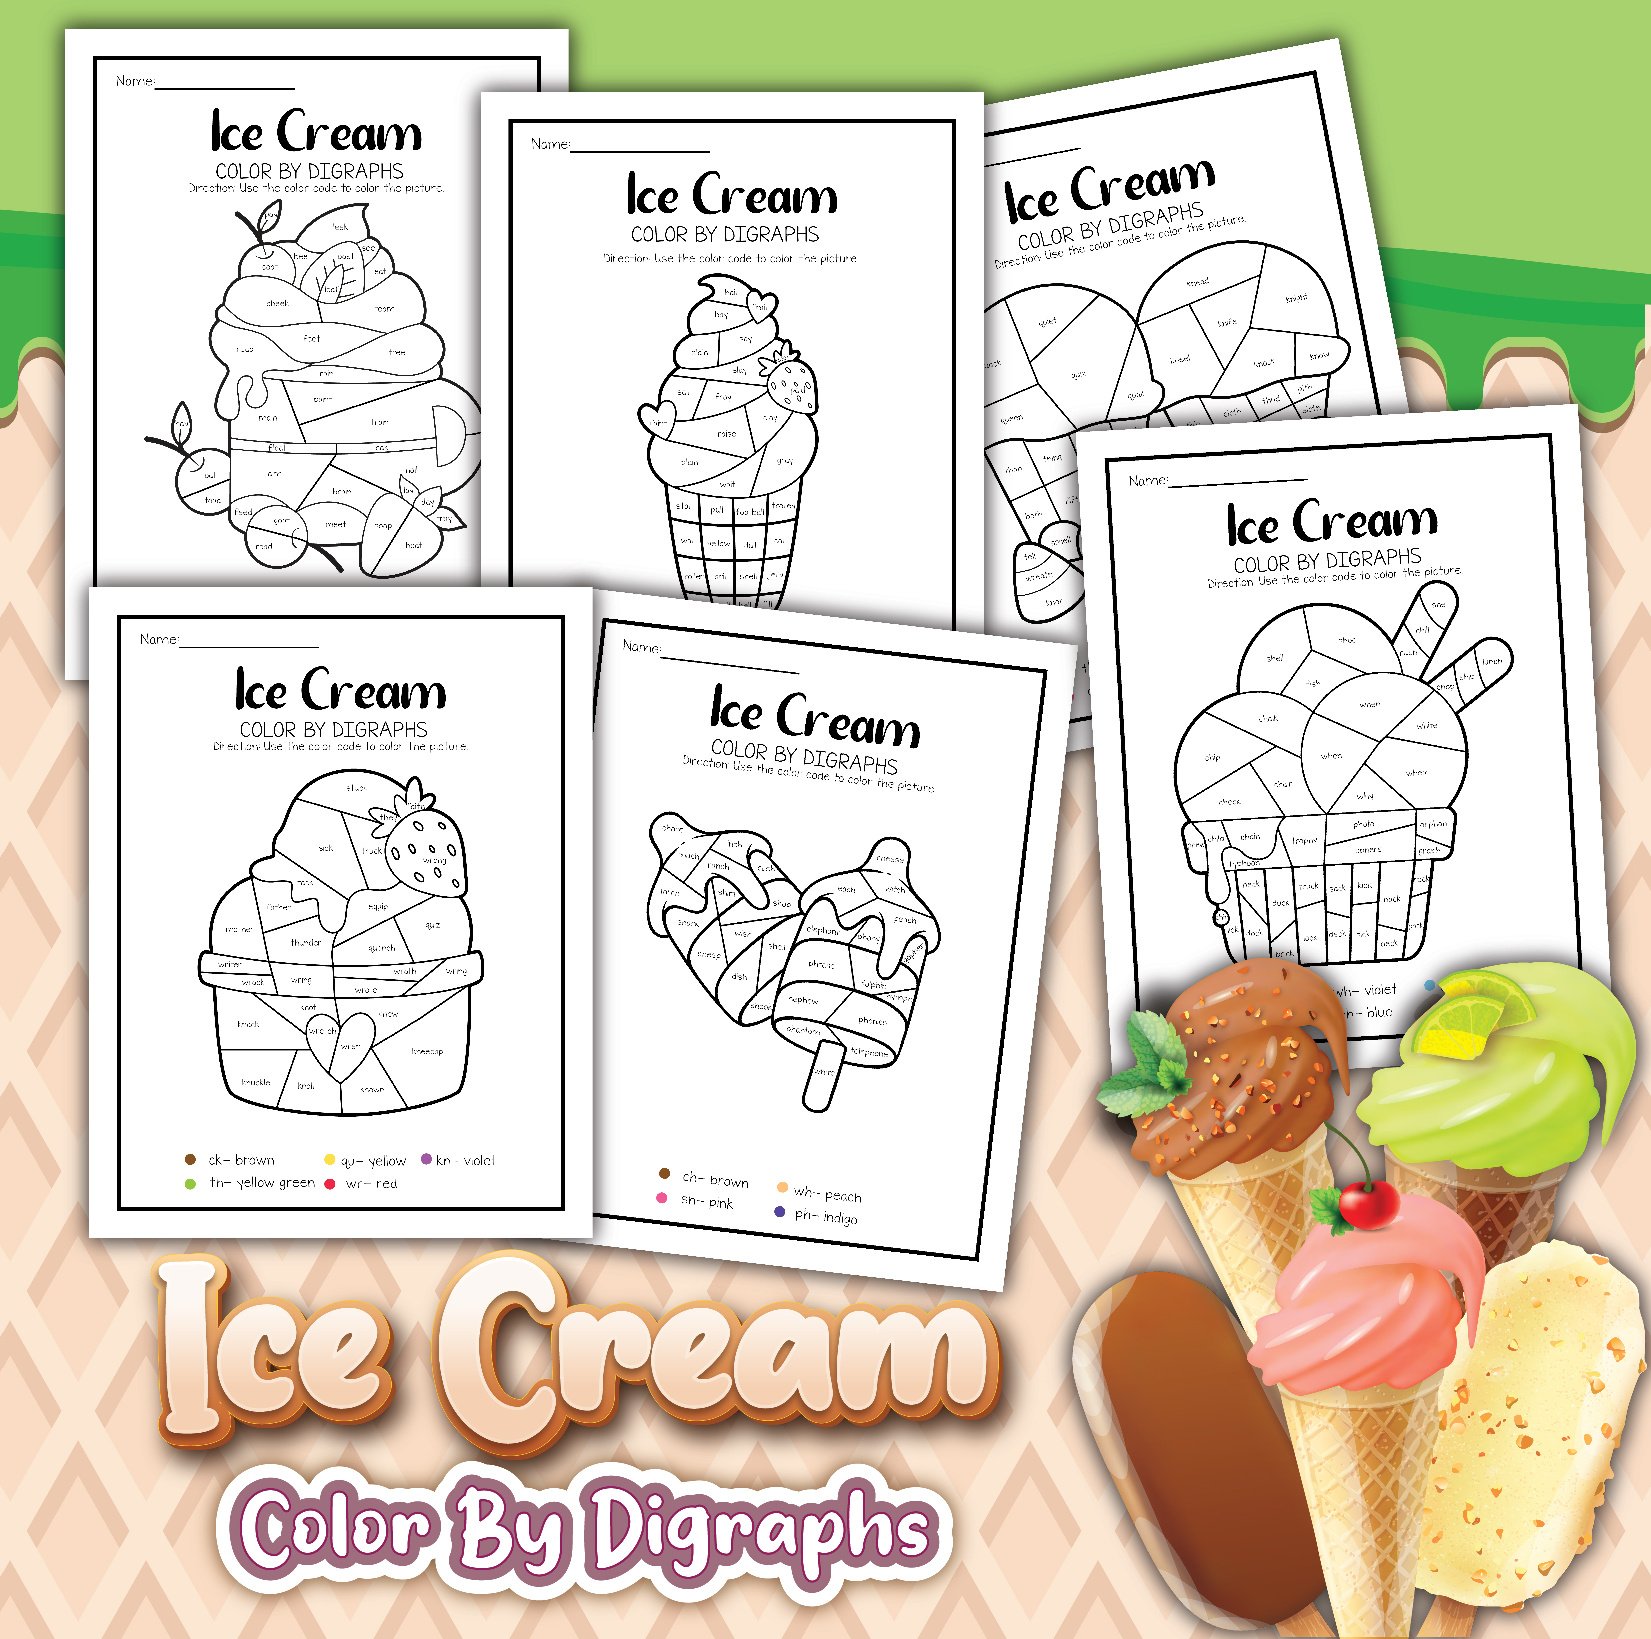 https://teachingmama.org/wp-content/uploads/2022/07/Ice-Cream-Color-by-Diagraphs-03-04.jpg